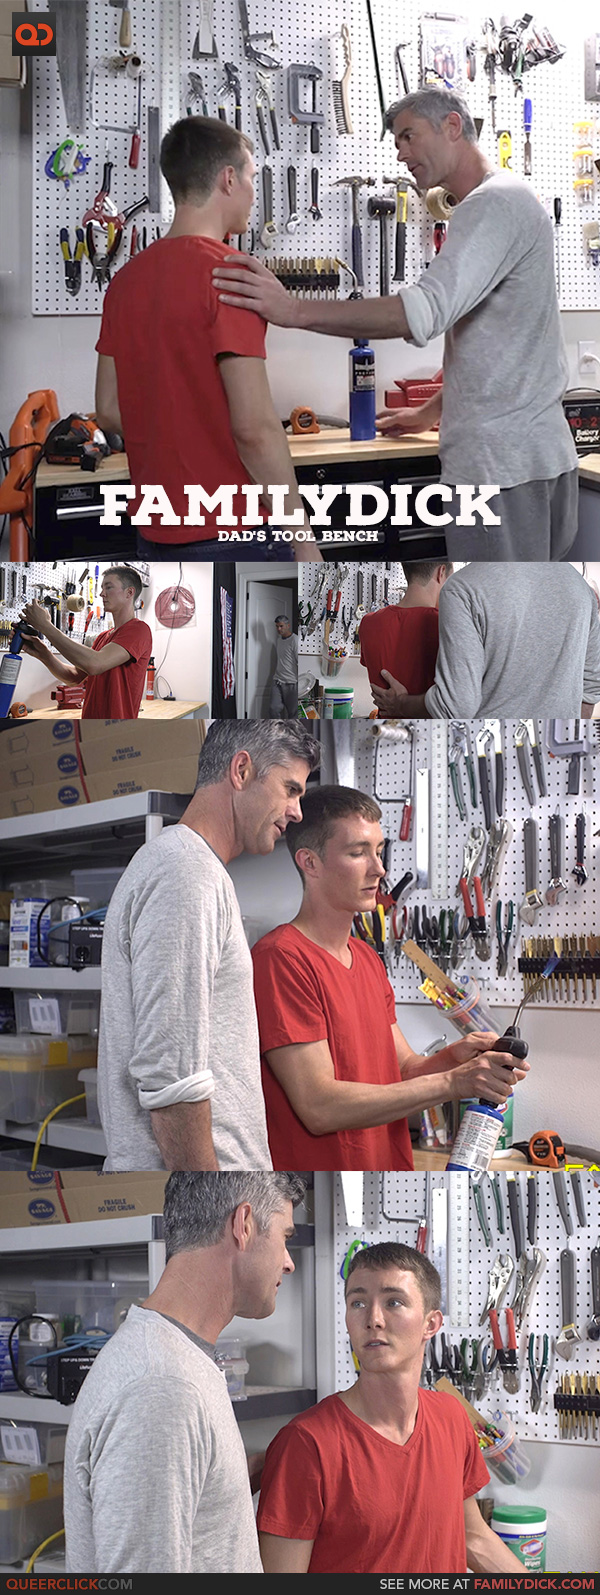 Family Dick: Dad's Tool Bench